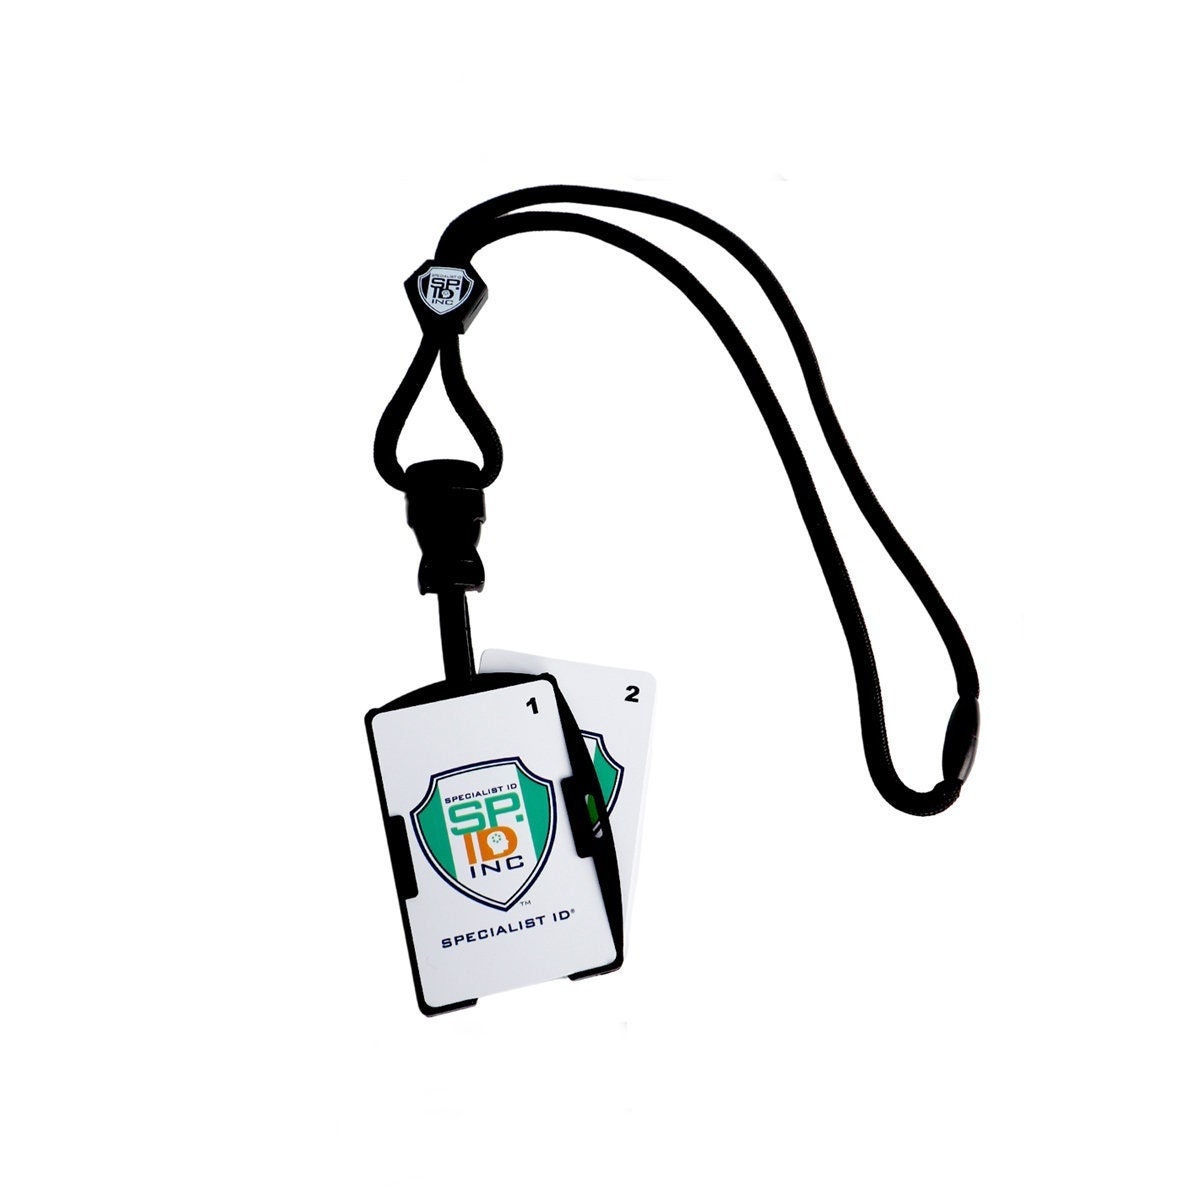 Personalized Vertical ID Badge Holder with Lanyard - Fashionable ID Card  Holders with Detachable Neck Lanyards - Soft Fiber,Metal Clip,Sturdy Buckle